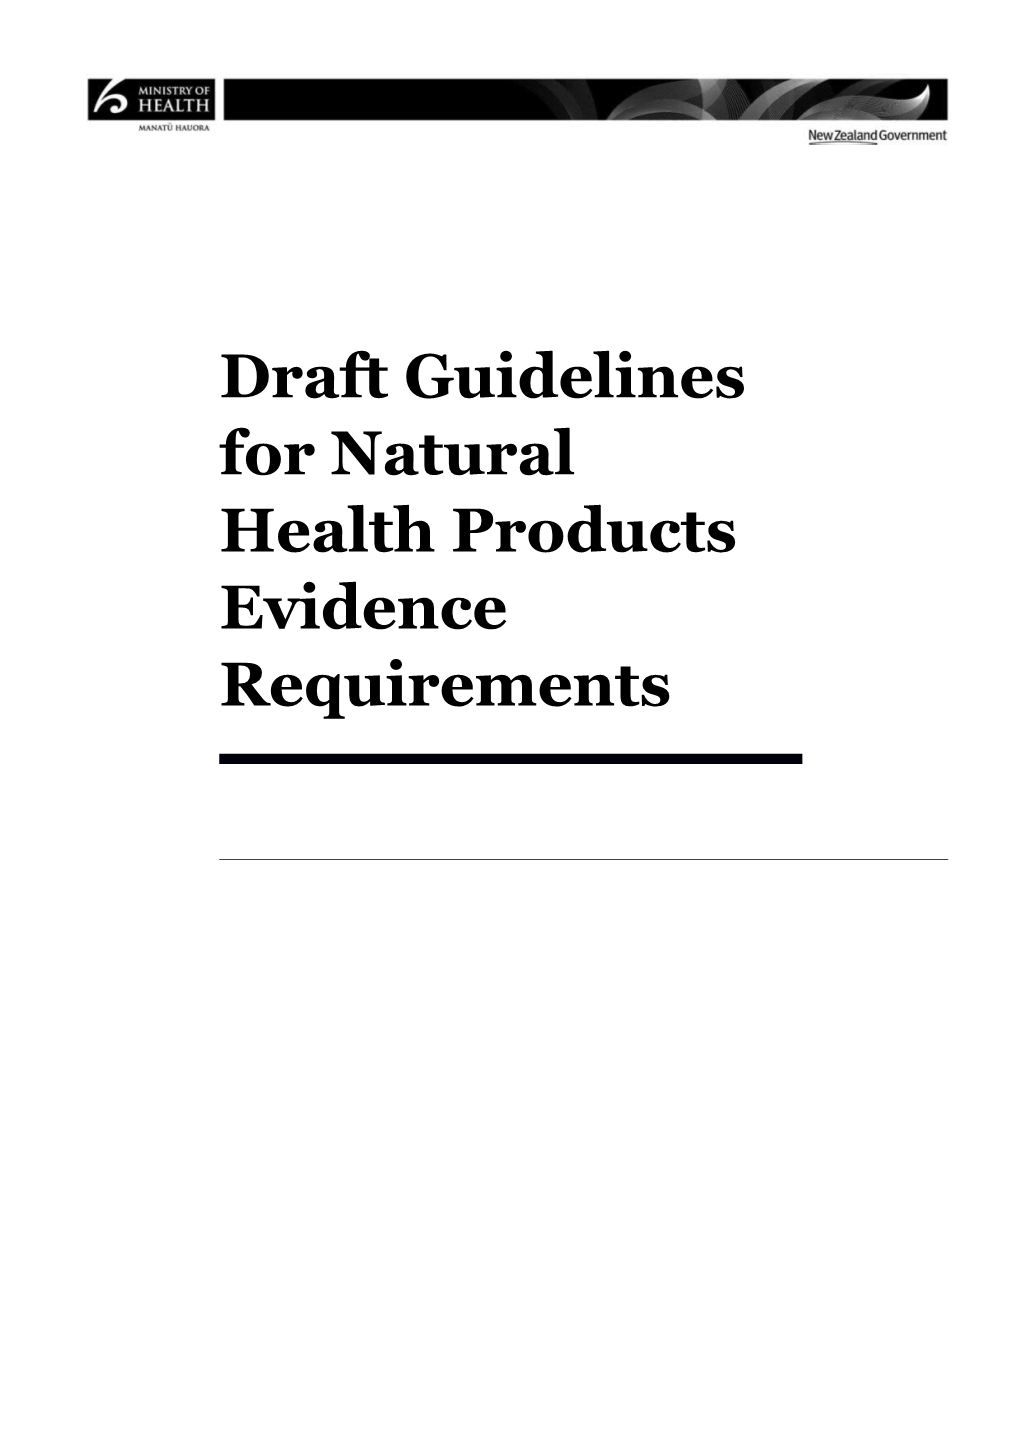 Draft Guidelines for Natural Health Products Evidence Requirements